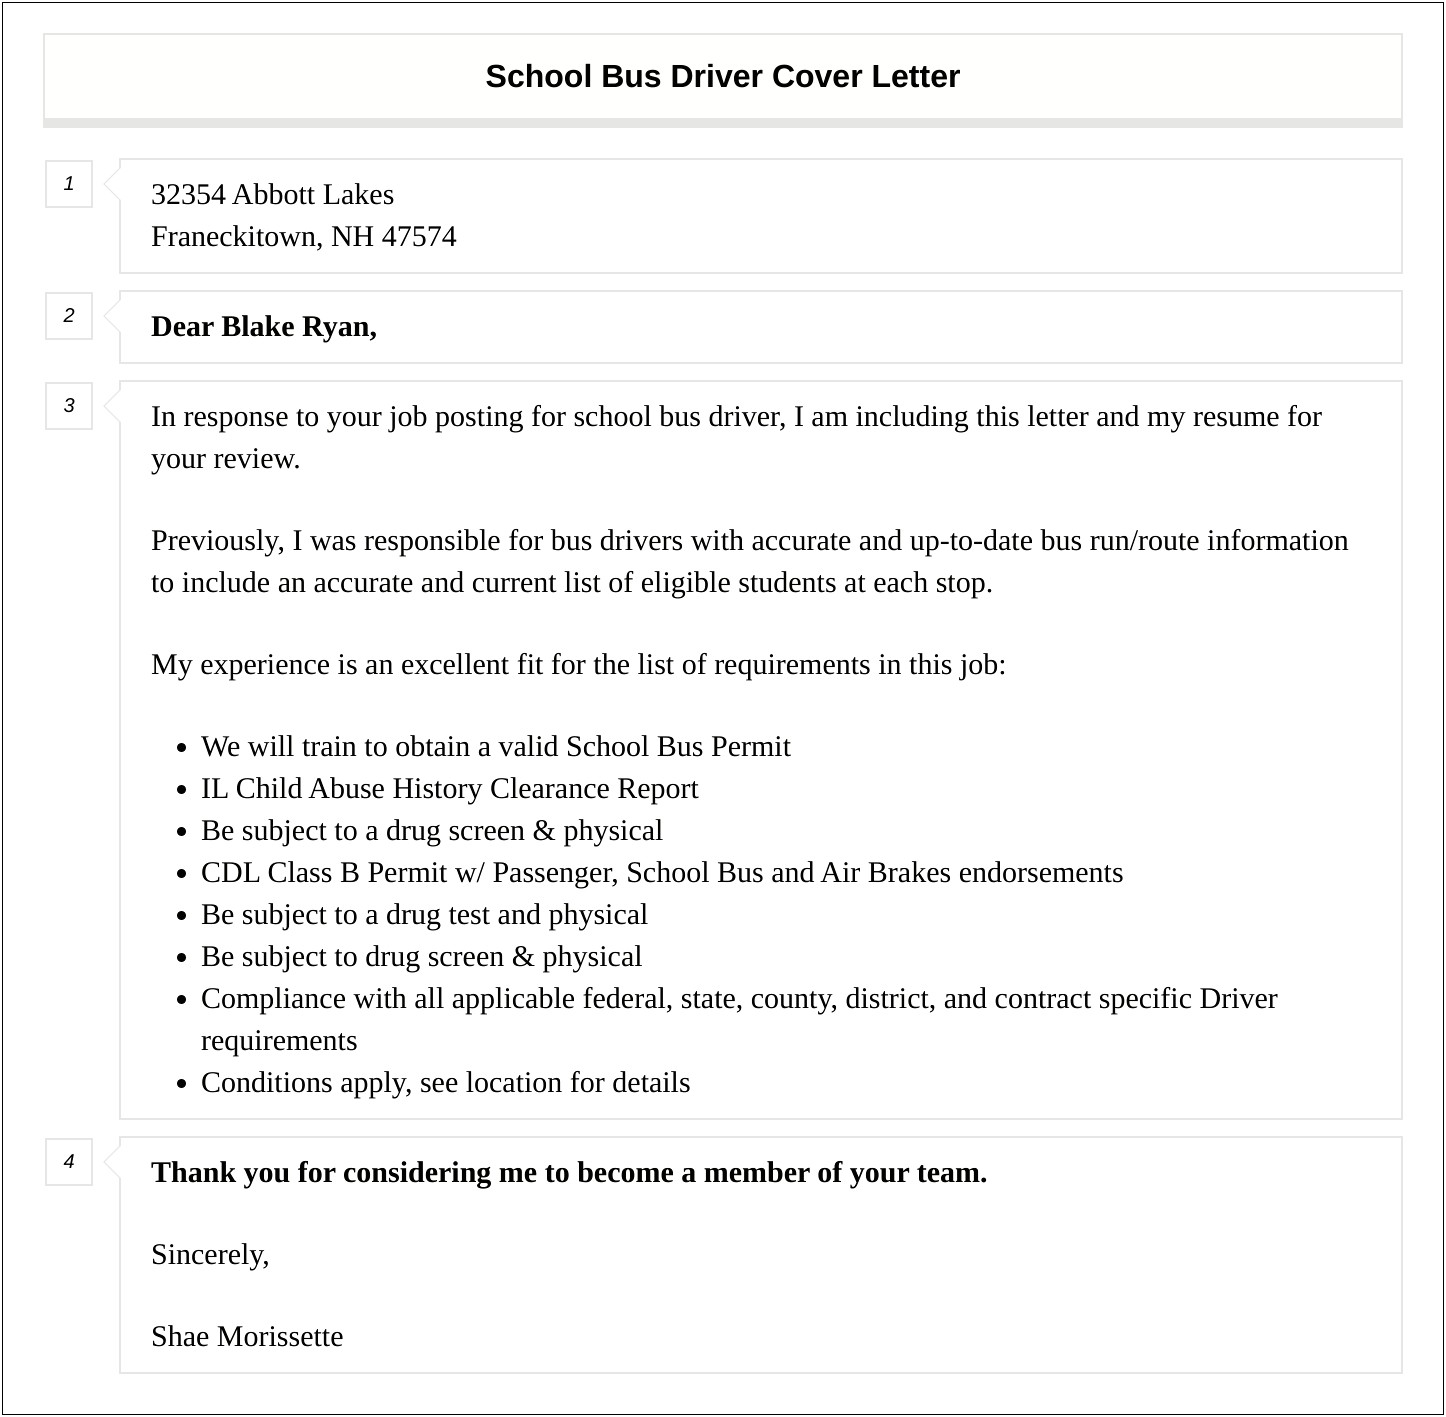 School Bus Driver Resume Cover Letter